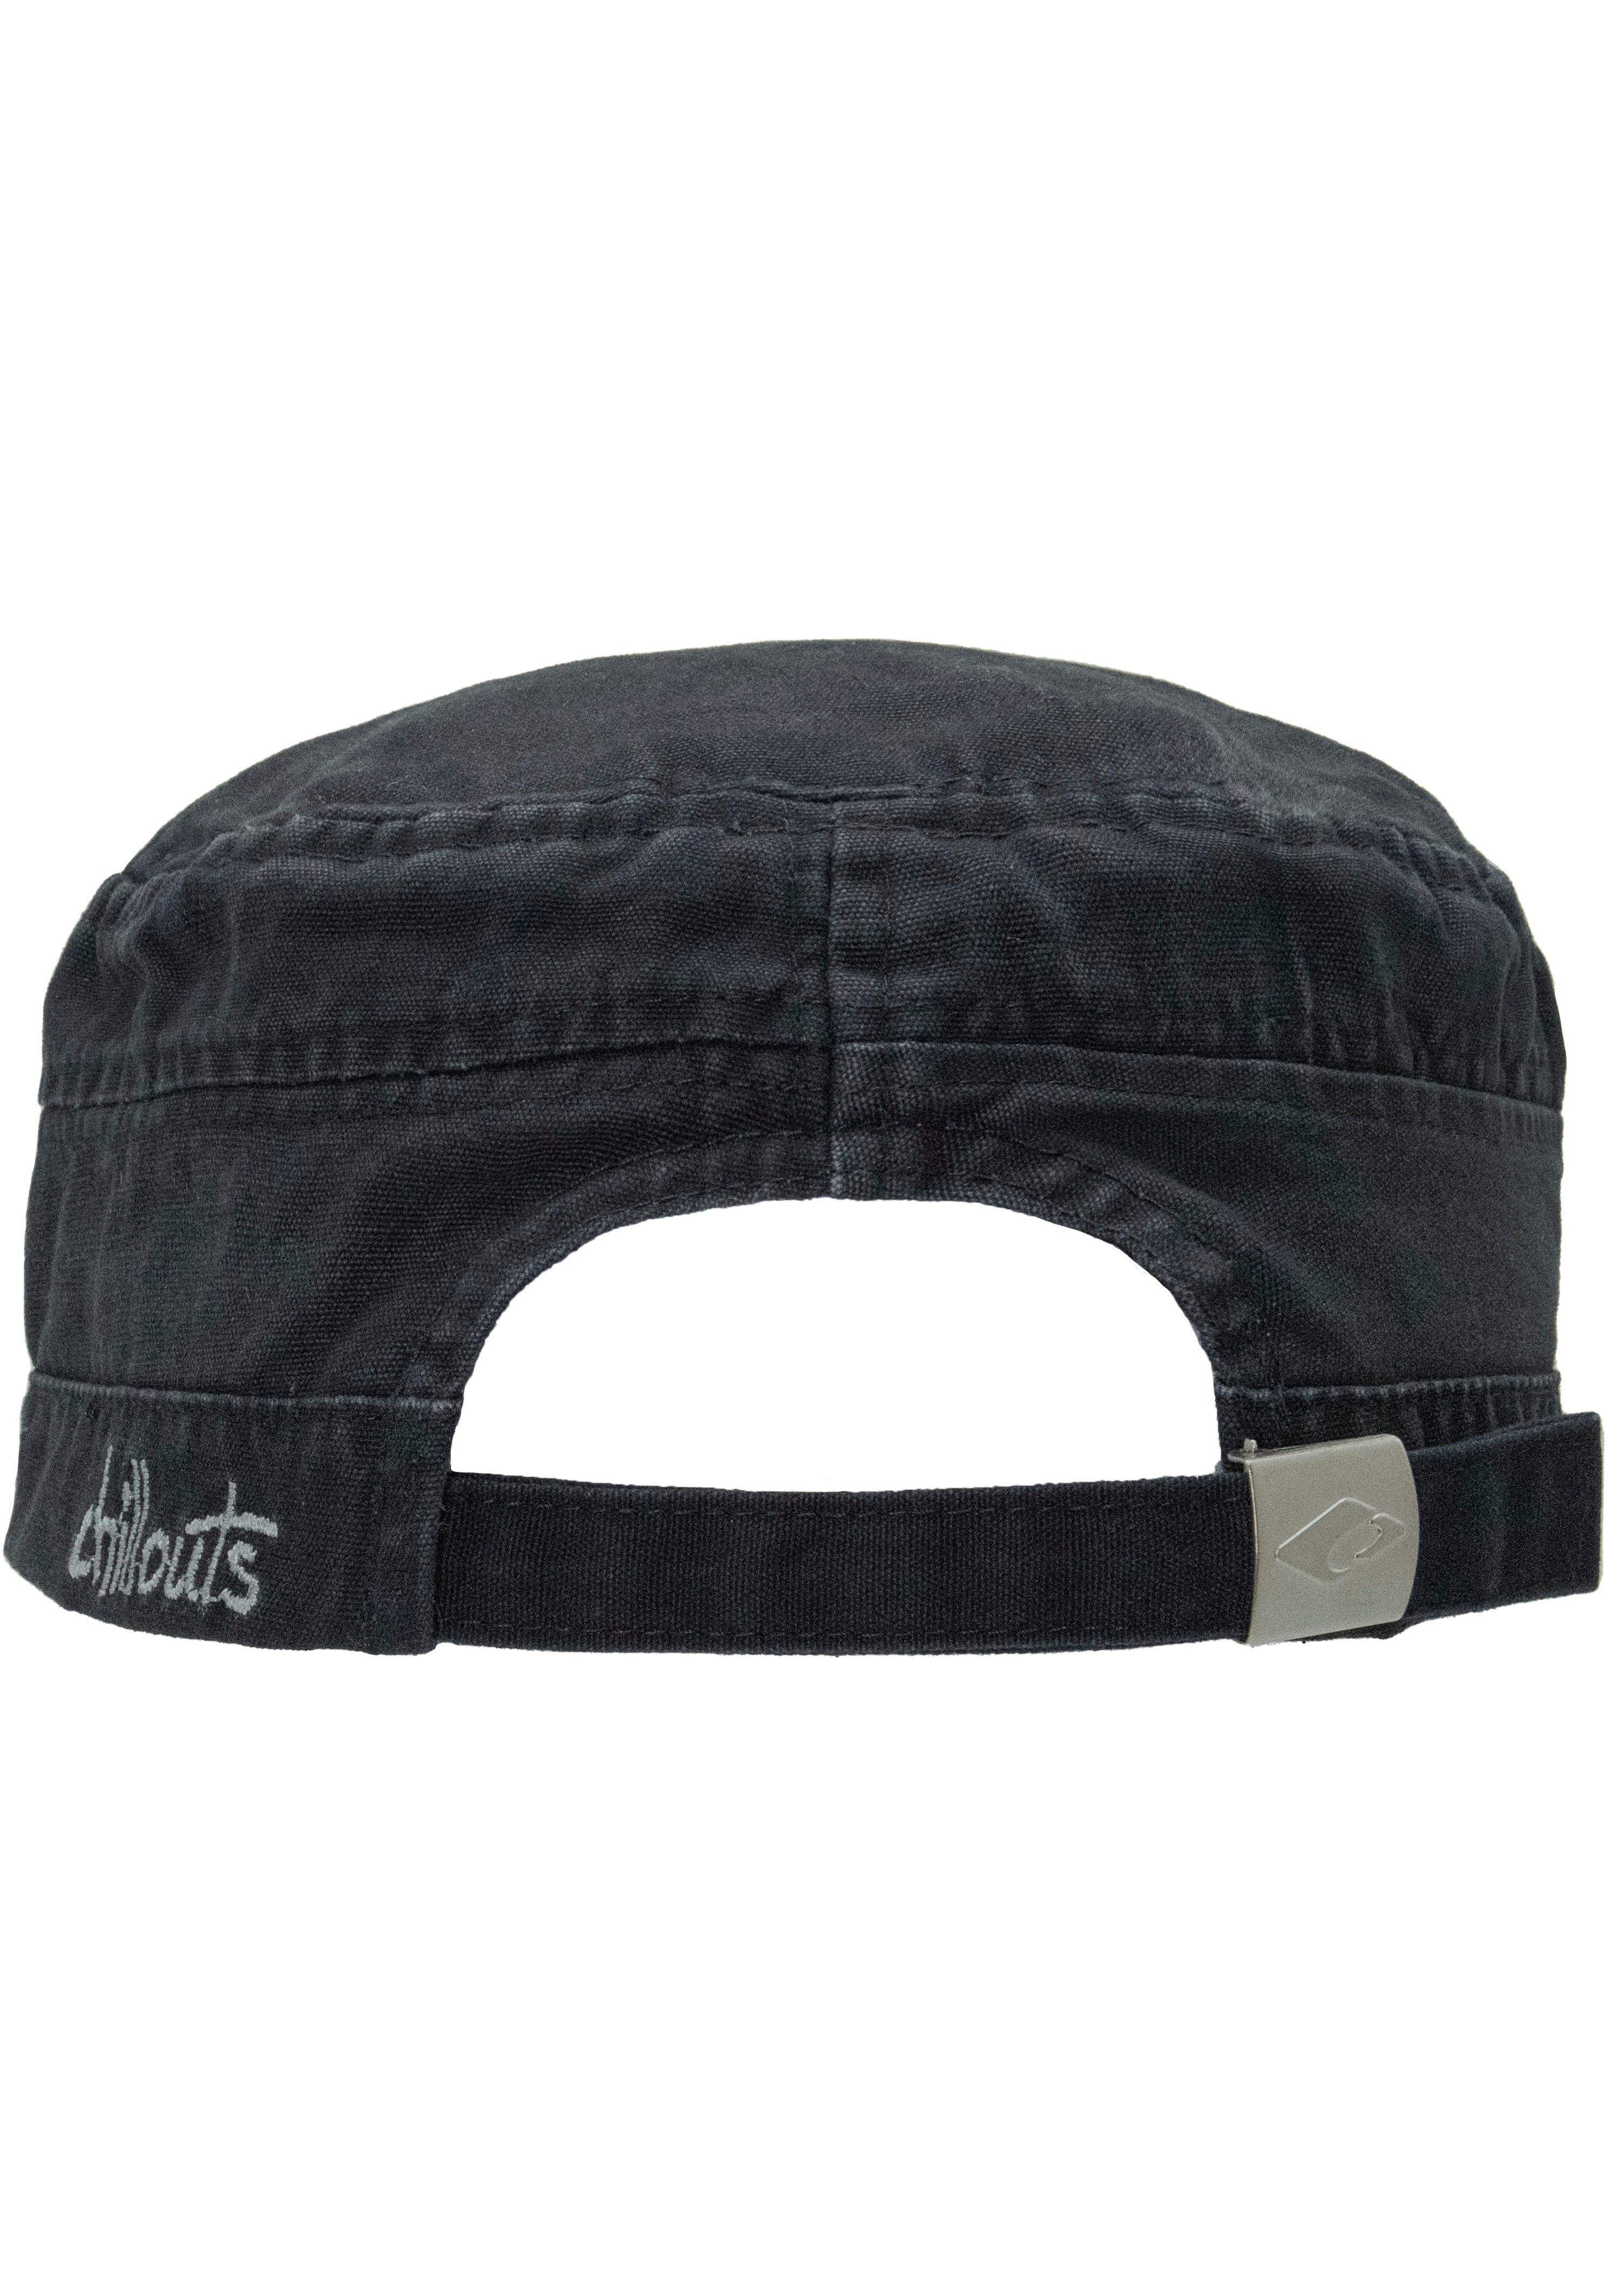 chillouts Baumwolle, reiner aus washed Size Army atmungsaktiv, One El Hat navy Paso Cap